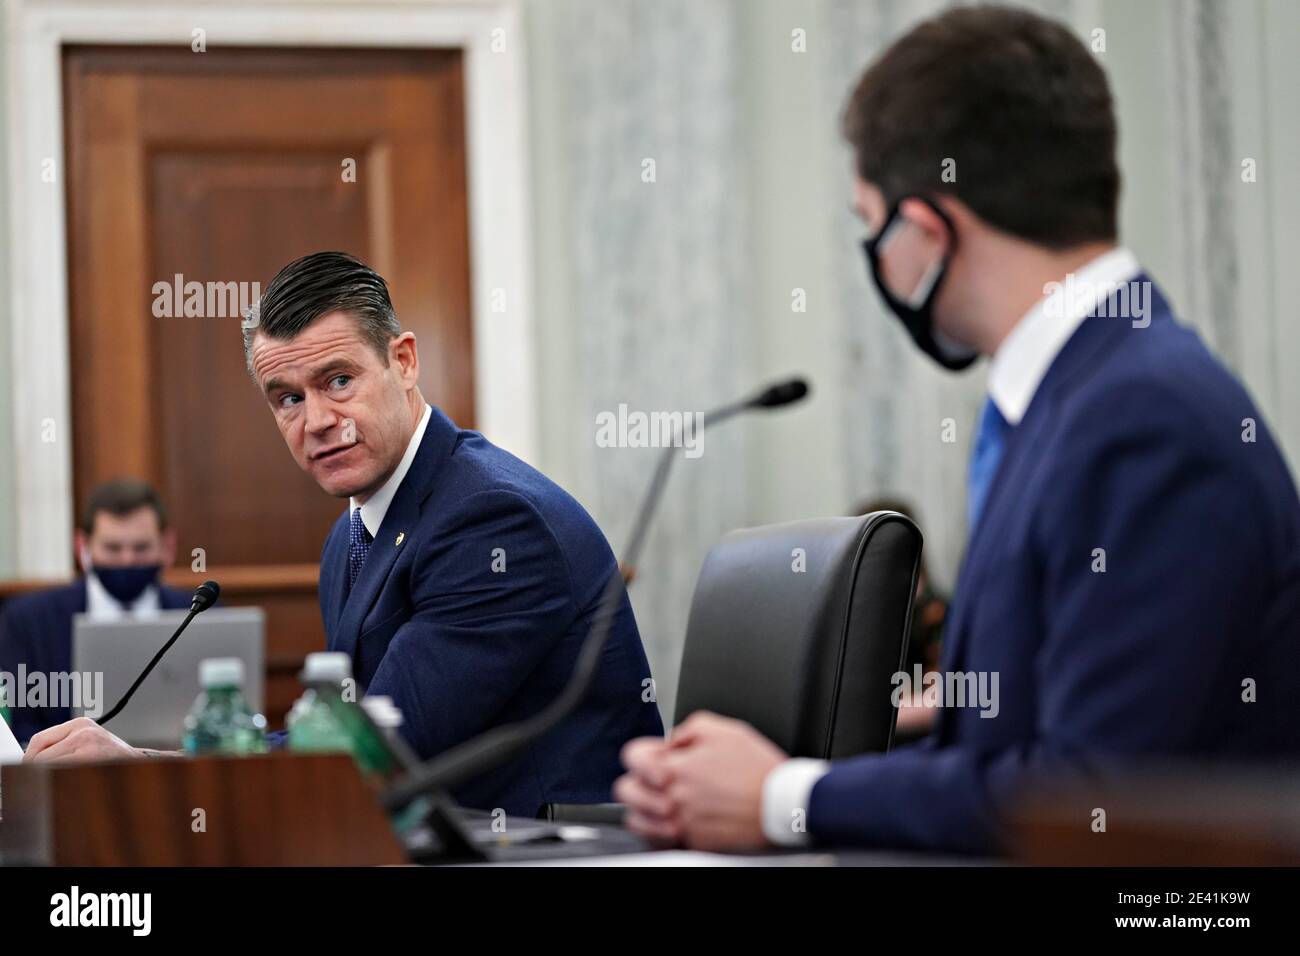 United States Senator Todd Young (Republican of Indiana), introduces Pete Buttigieg, U.S. secretary of transportation nominee for U.S. President Joe Biden, right, during a Senate Commerce, Science and Transportation Committee confirmation hearing in Washington, DC, U.S., on Thursday, Jan. 21, 2021. Buttigieg, is pledging to carry out the administration's ambitious agenda to rebuild the nation's infrastructure, calling it a 'generational opportunity' to create new jobs, fight economic inequality and stem climate change. Credit: Stefani Reynolds/Pool via CNP | usage worldwide Stock Photo